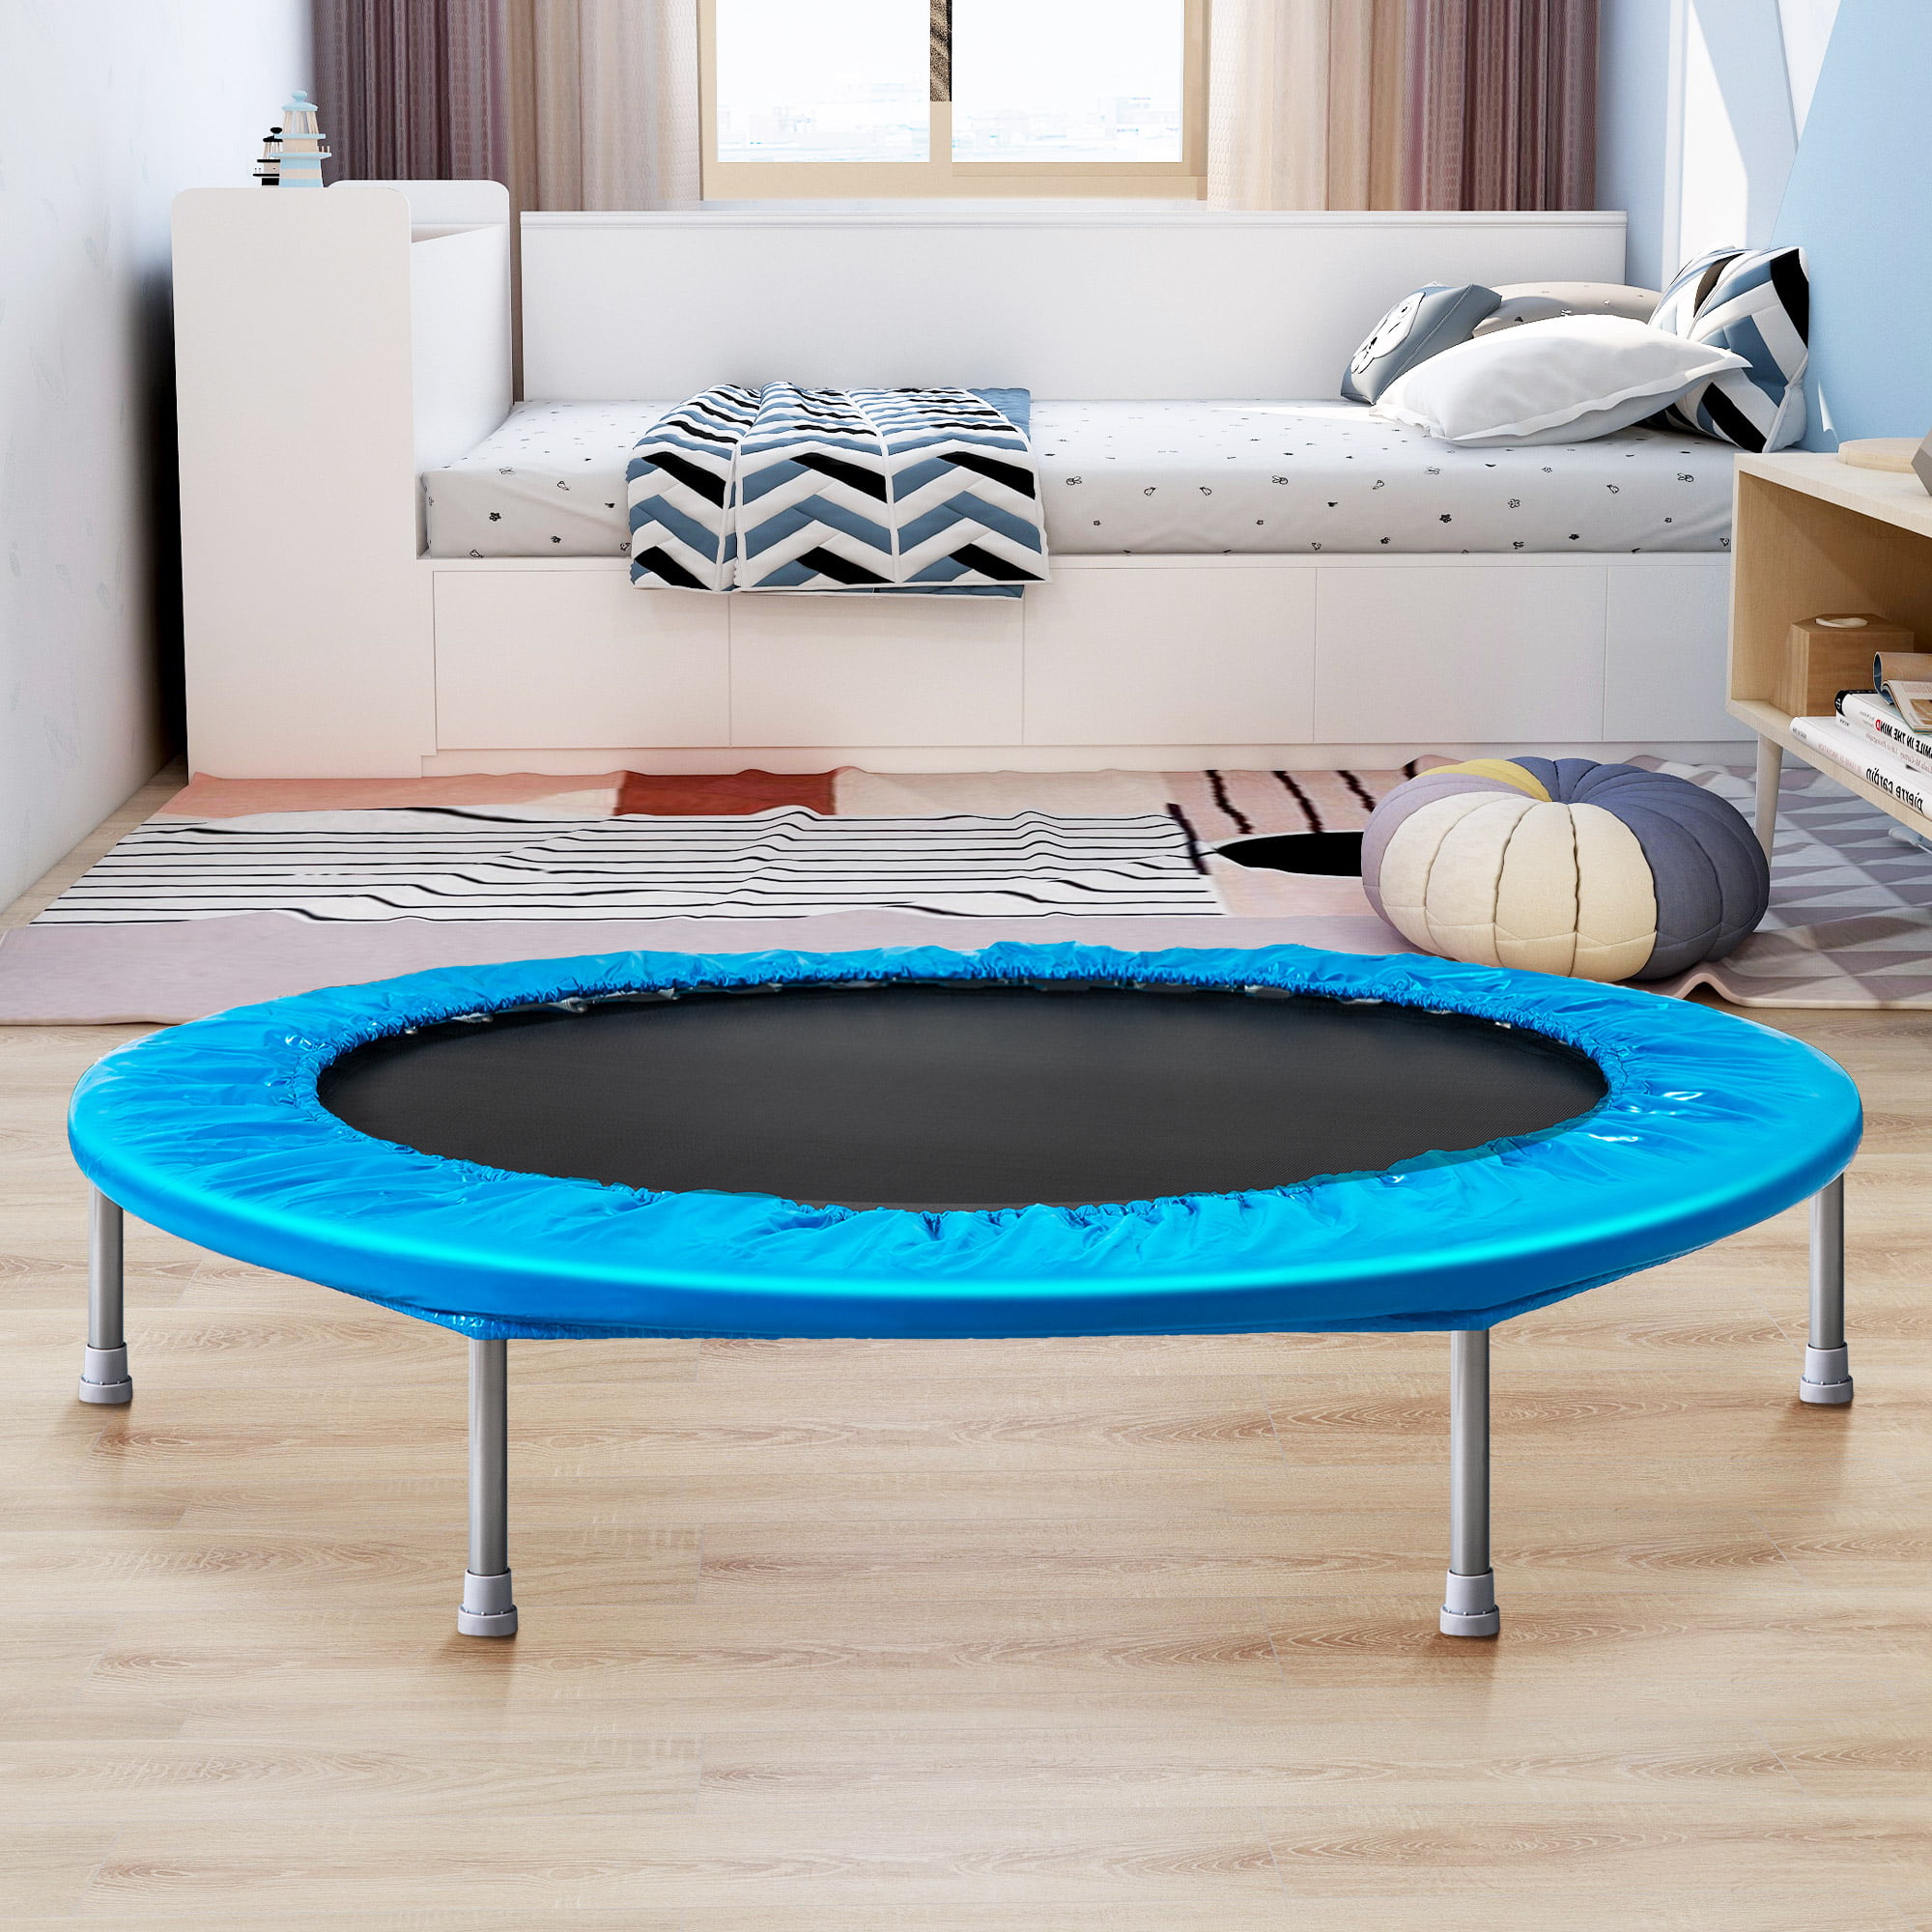 45" Trampoline for Kids, BTMWAY Outdoor Folding Kids Mini Trampoline Rebounder Exercises, Indoor Jump Trampoline with Spring Cover Padding, Max Load 180lbs, Blue, R636